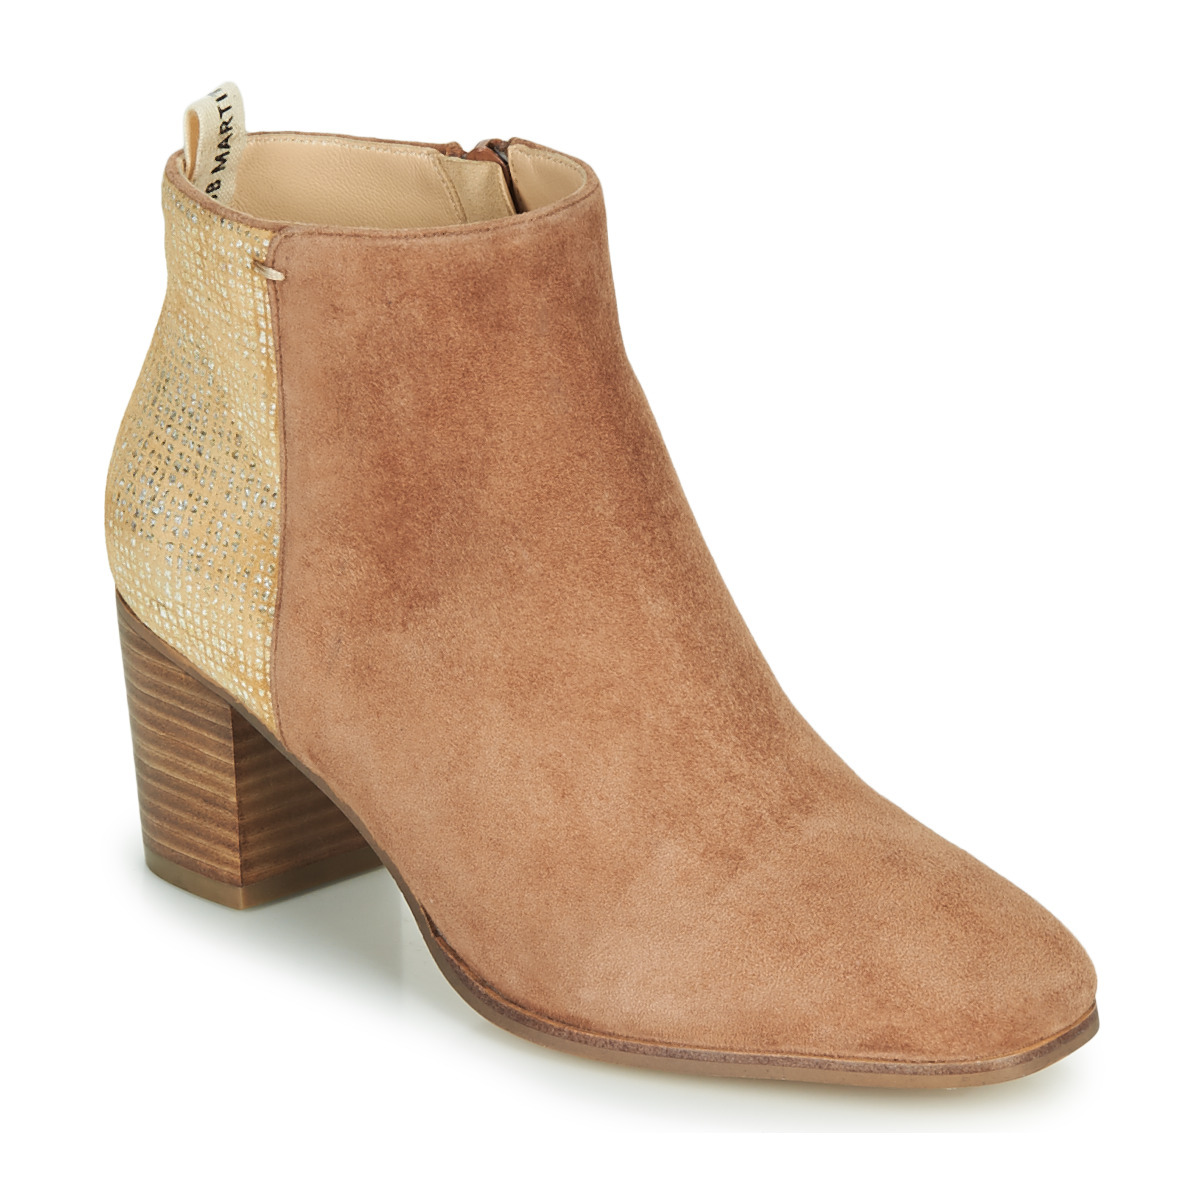 Spartoo Brown Woman Ankle Boots Jb Martin GOOFASH